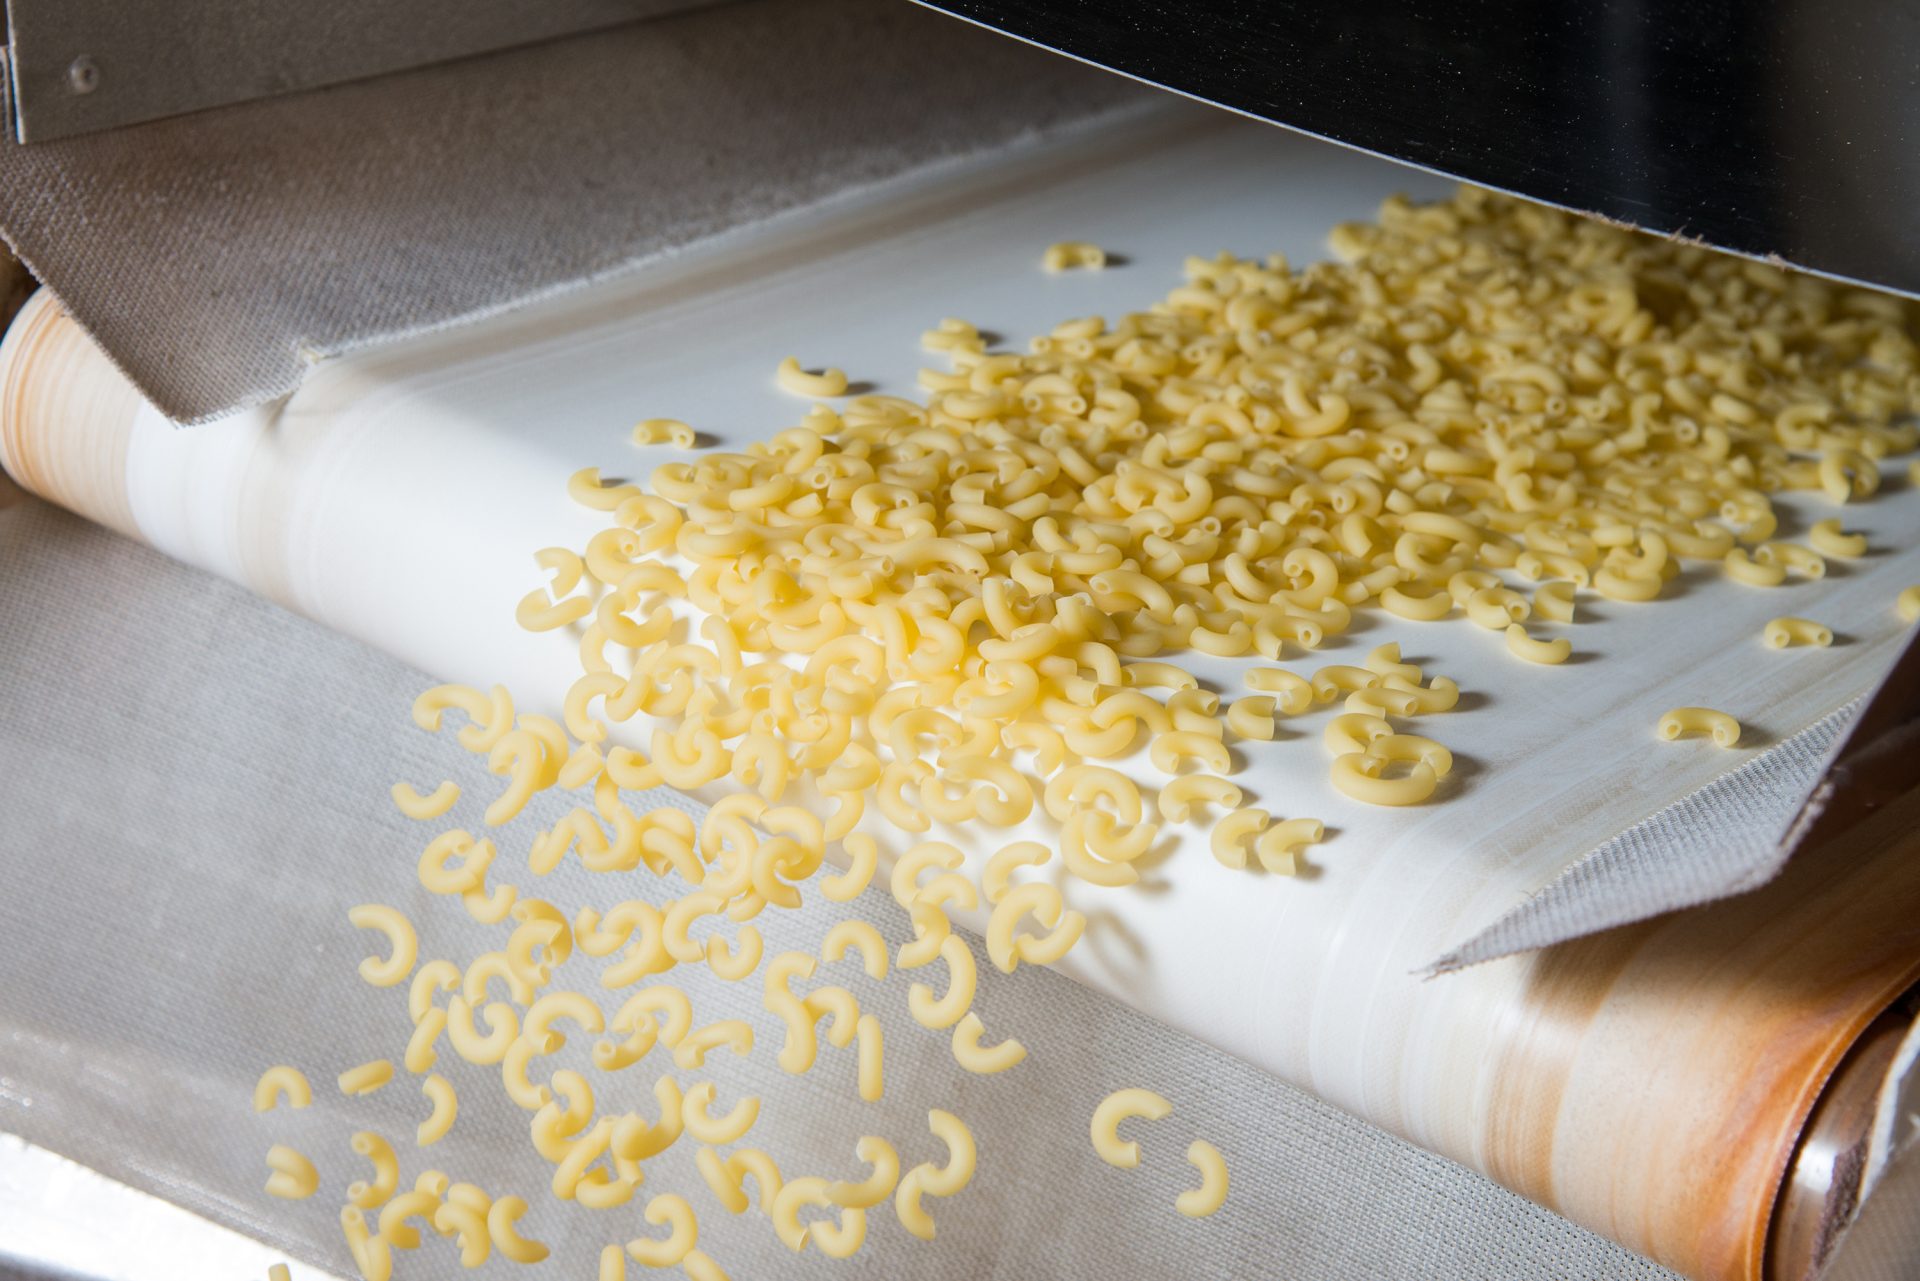 macaroni noodles with enhancing food processing efficiency with Colorado Mill Equipment's advanced machinery